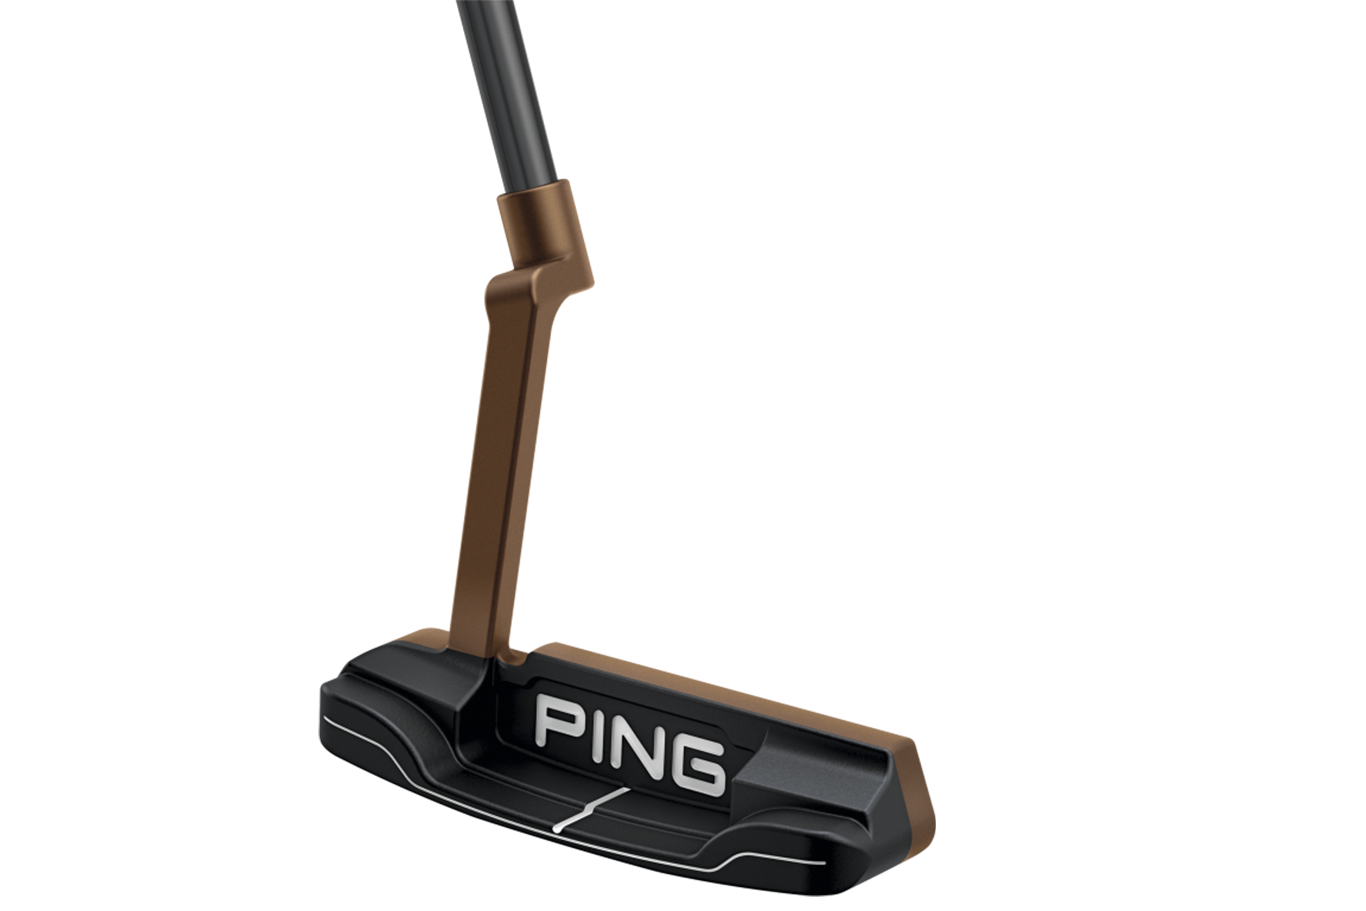 PING introduces Heppler putters